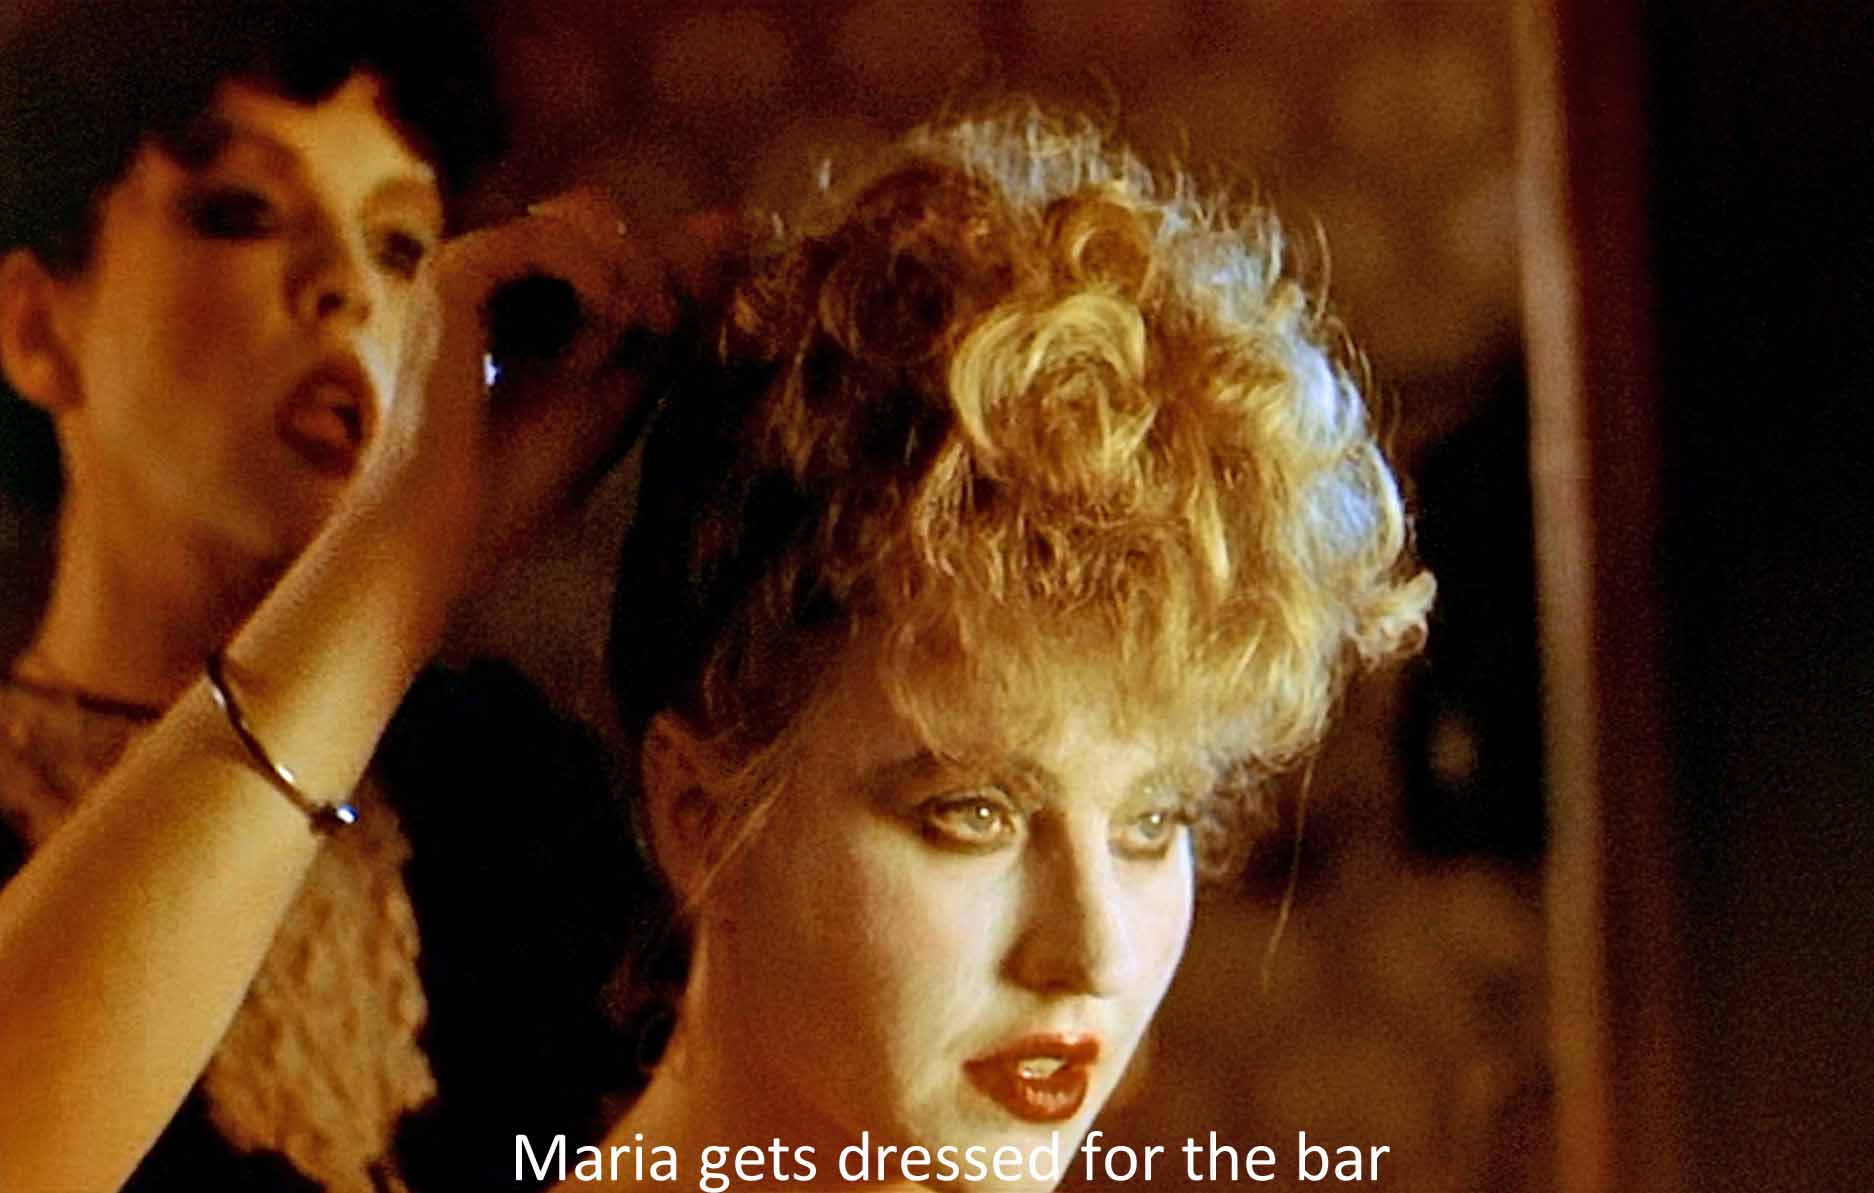 Maria gets dressed for the bar